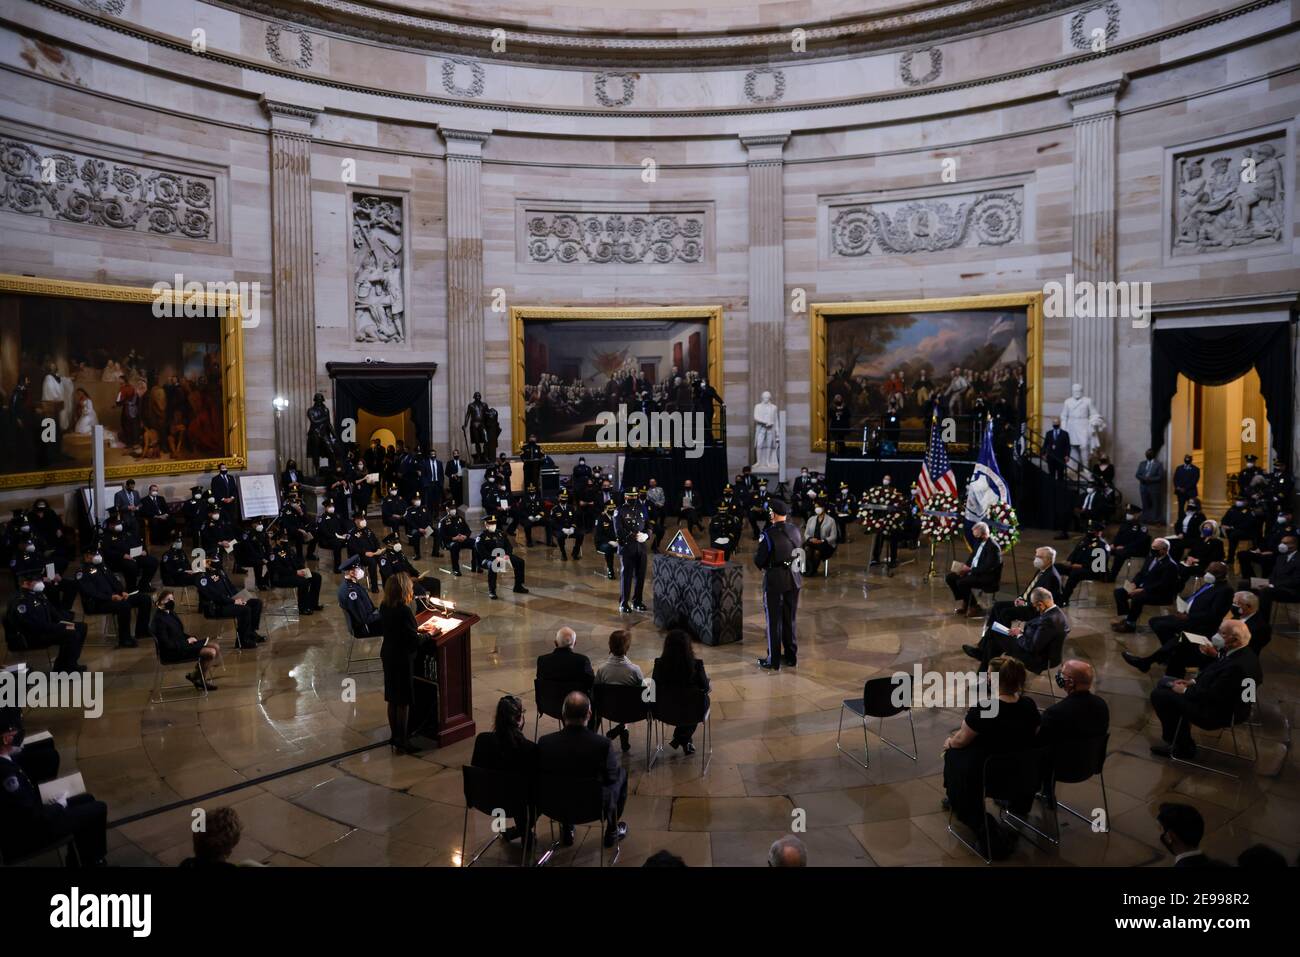 U.S. House of Representatives Speaker Nancy Pelosi speaks during a ceremony for late Capitol Police officer Brian Sicknick as he lies in honor in the Rotunda of the U.S. Capitol in Washington, U.S. February 3, 2021. (Photo by Carlos Barria/Pool/Sipa USA) Stock Photo